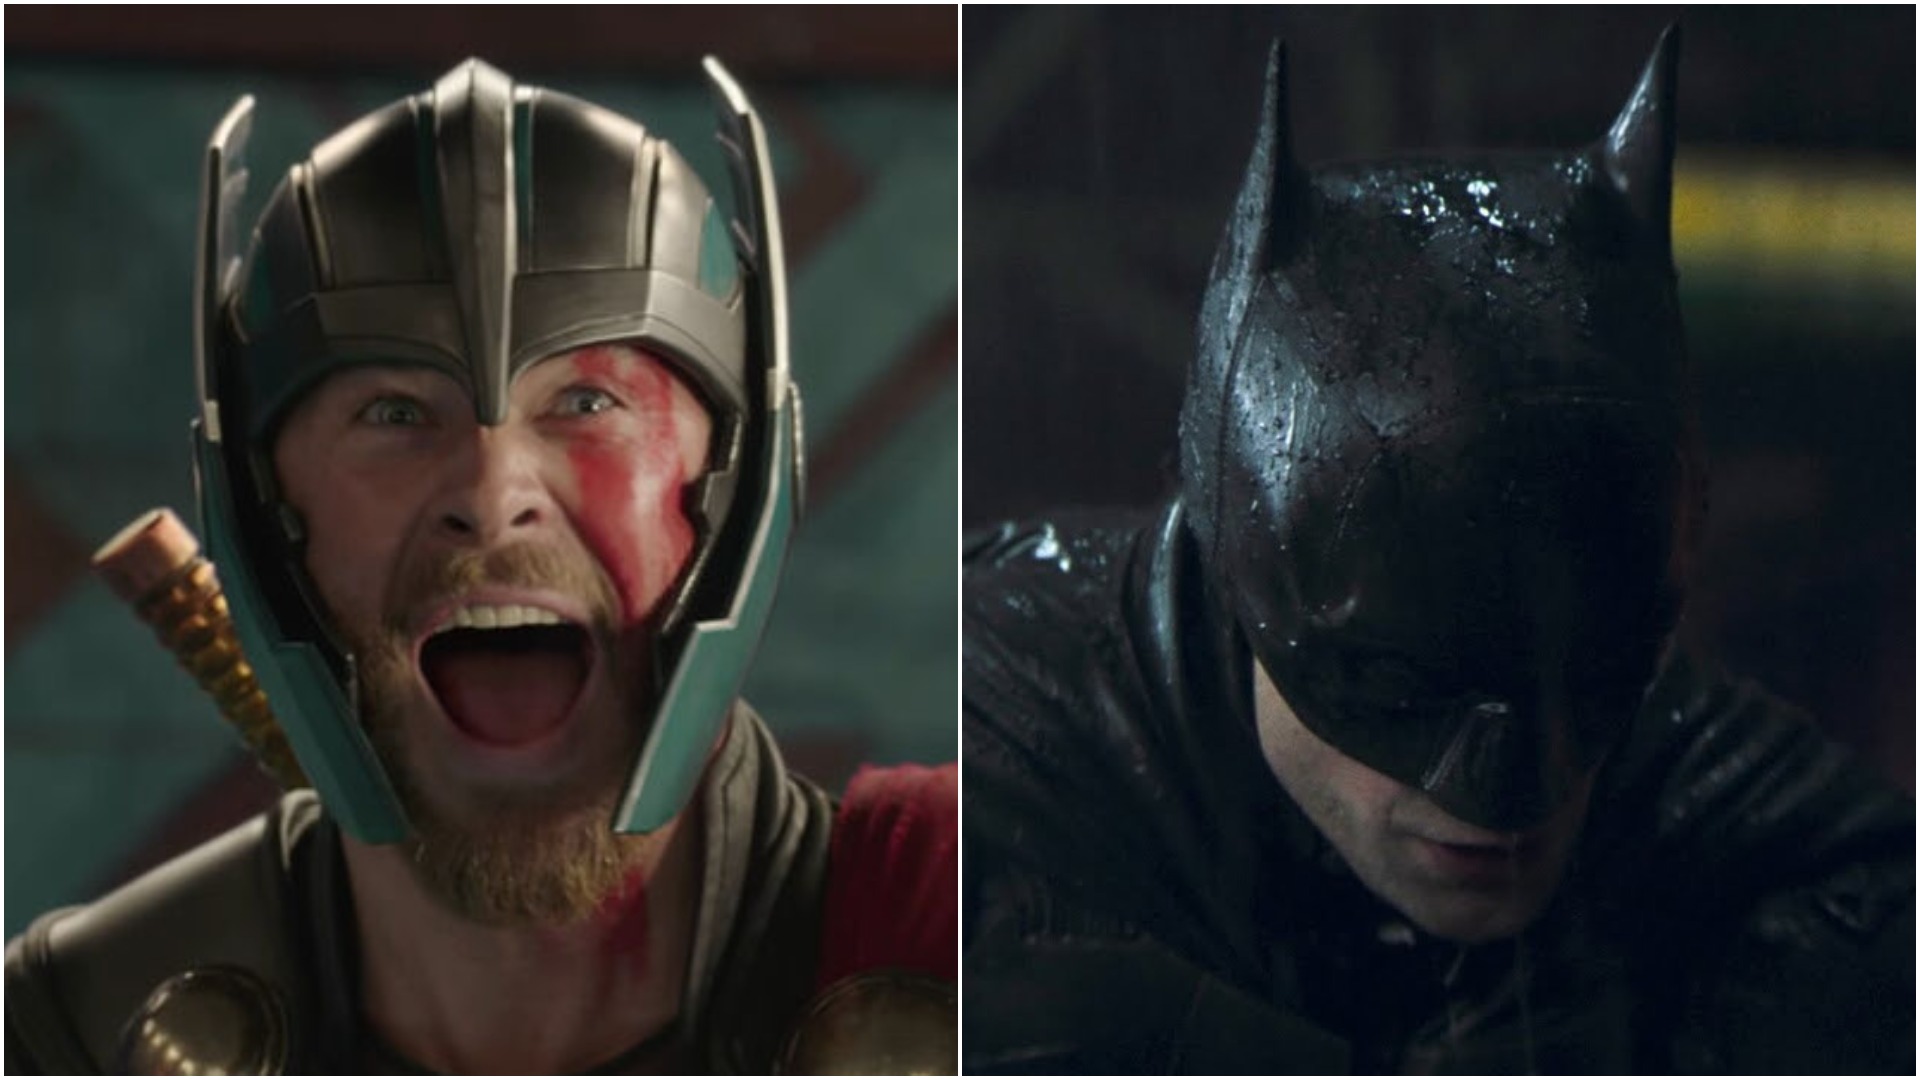 Thor: Love and Thunder' Box Office Falls To 'The Batman